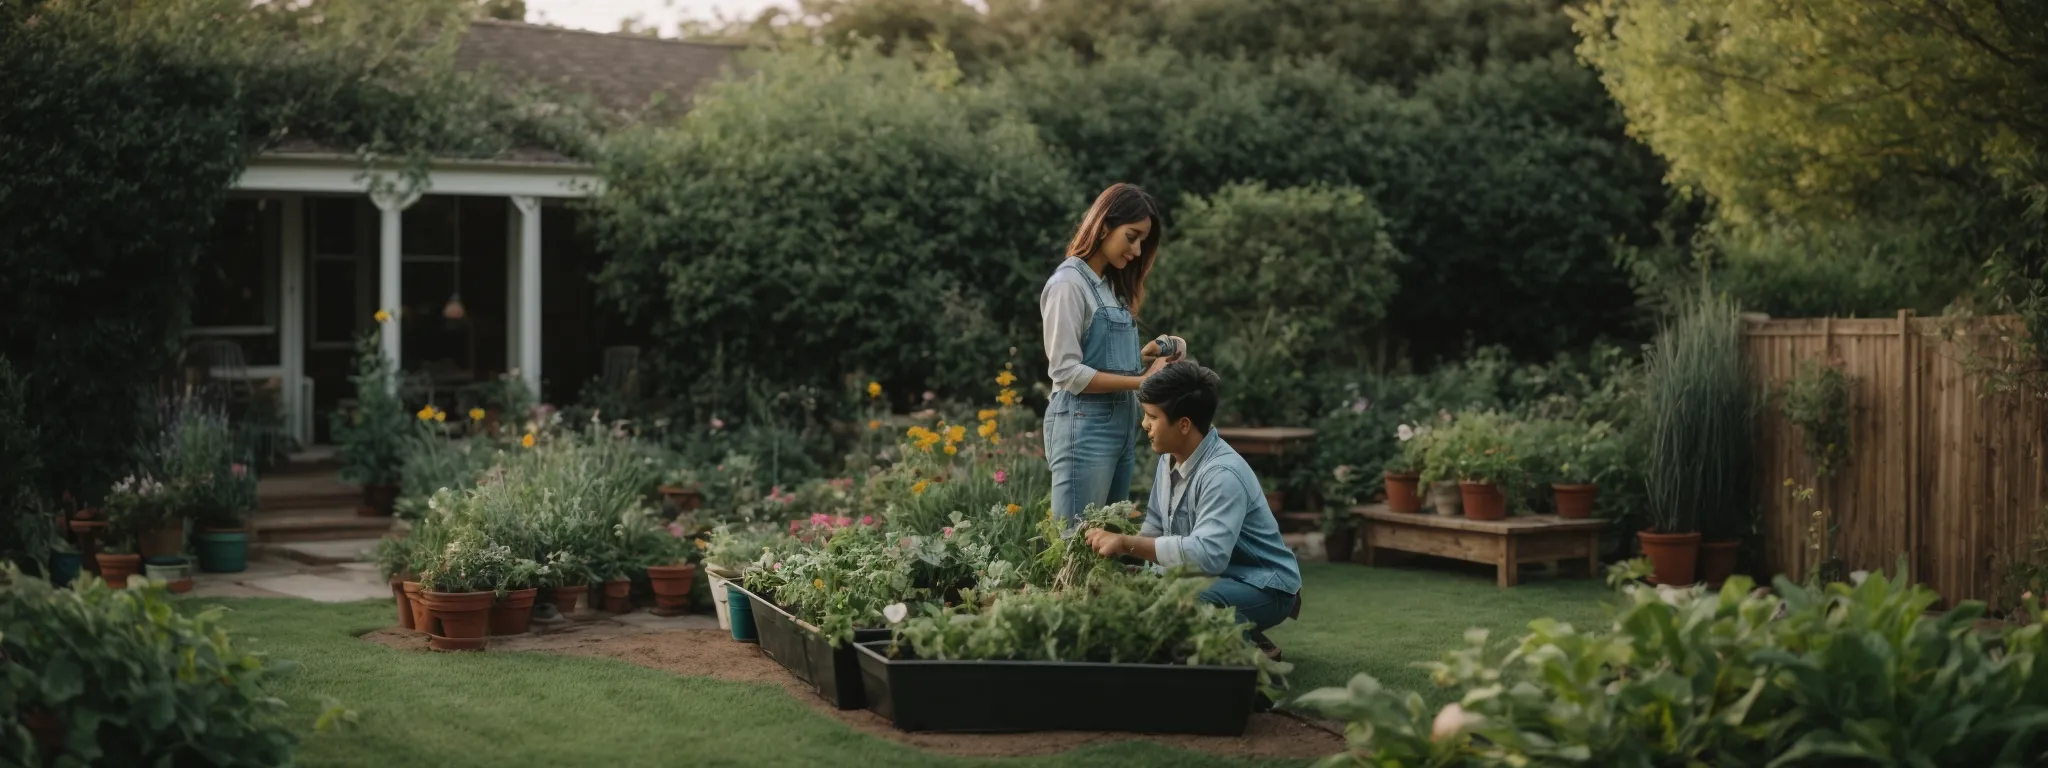 a couple peacefully gardening together in a flourishing backyard, symbolizing growth and nurturing.